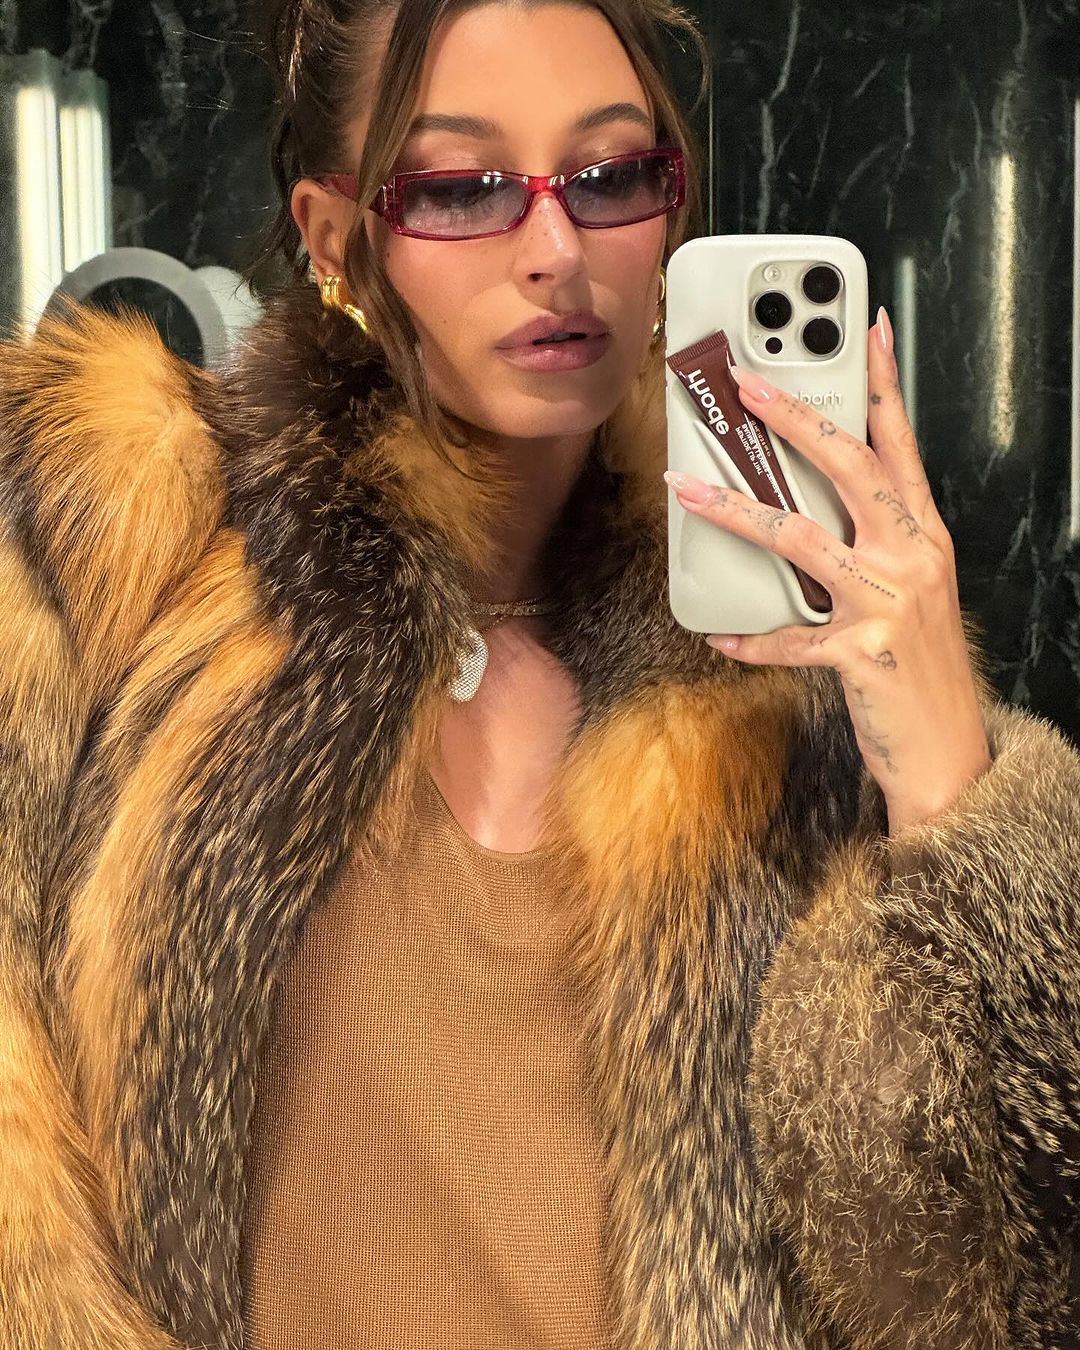 hailey bieber taking picture in mirror while wearing sunglasses